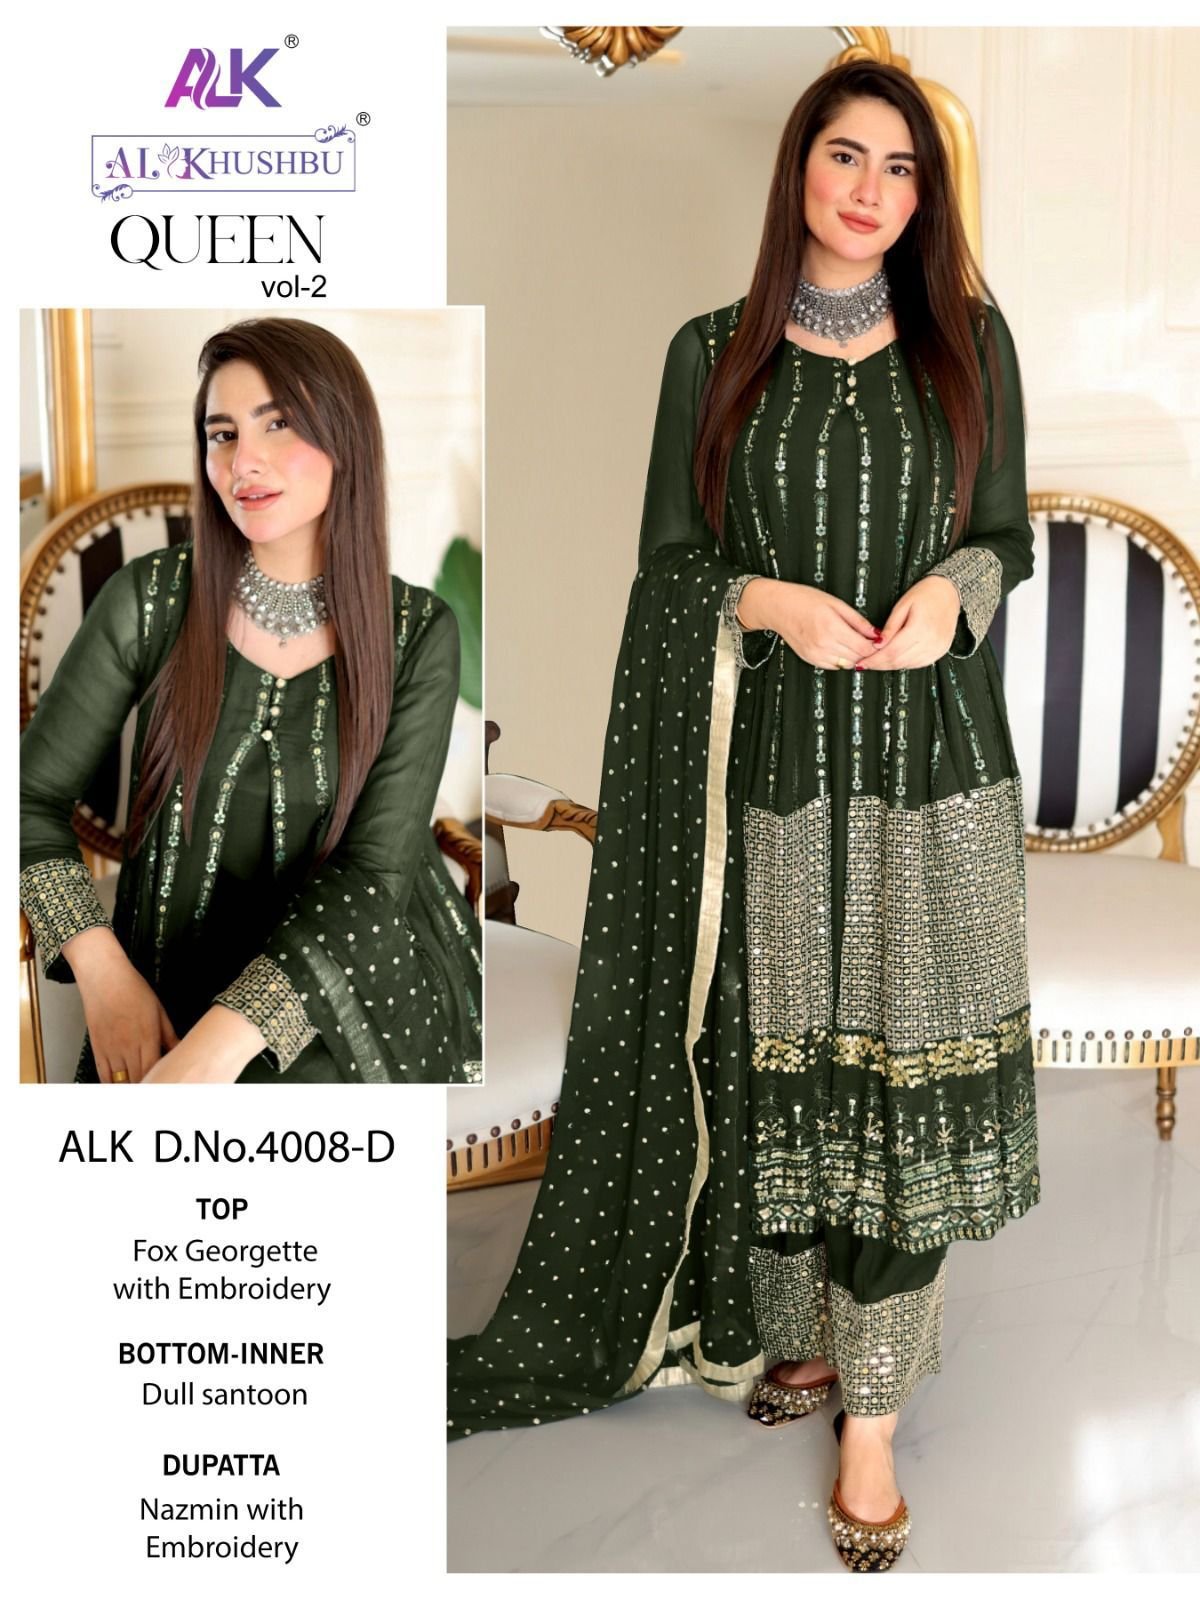 Traditional Dresses And National Dress of Pakistan | City Book